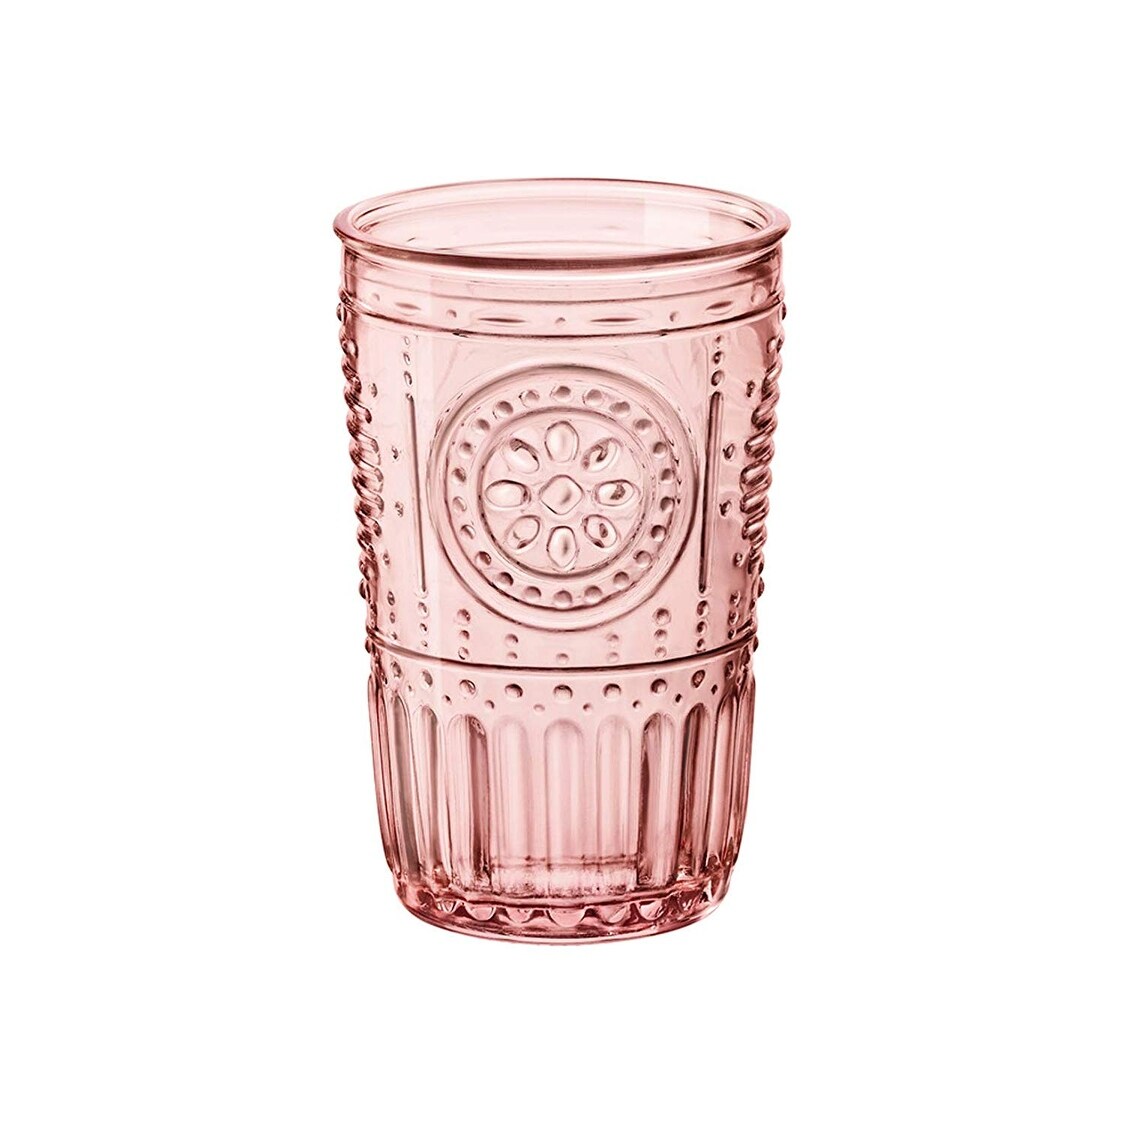 https://ak1.ostkcdn.com/images/products/is/images/direct/6642d1129c33b81a13b5a5541c173f2ee5600784/Bormioli-Rocco-Romantic-Glass-Drinking-Tumbler-Victorian-Inspired-Set-Of-4.jpg